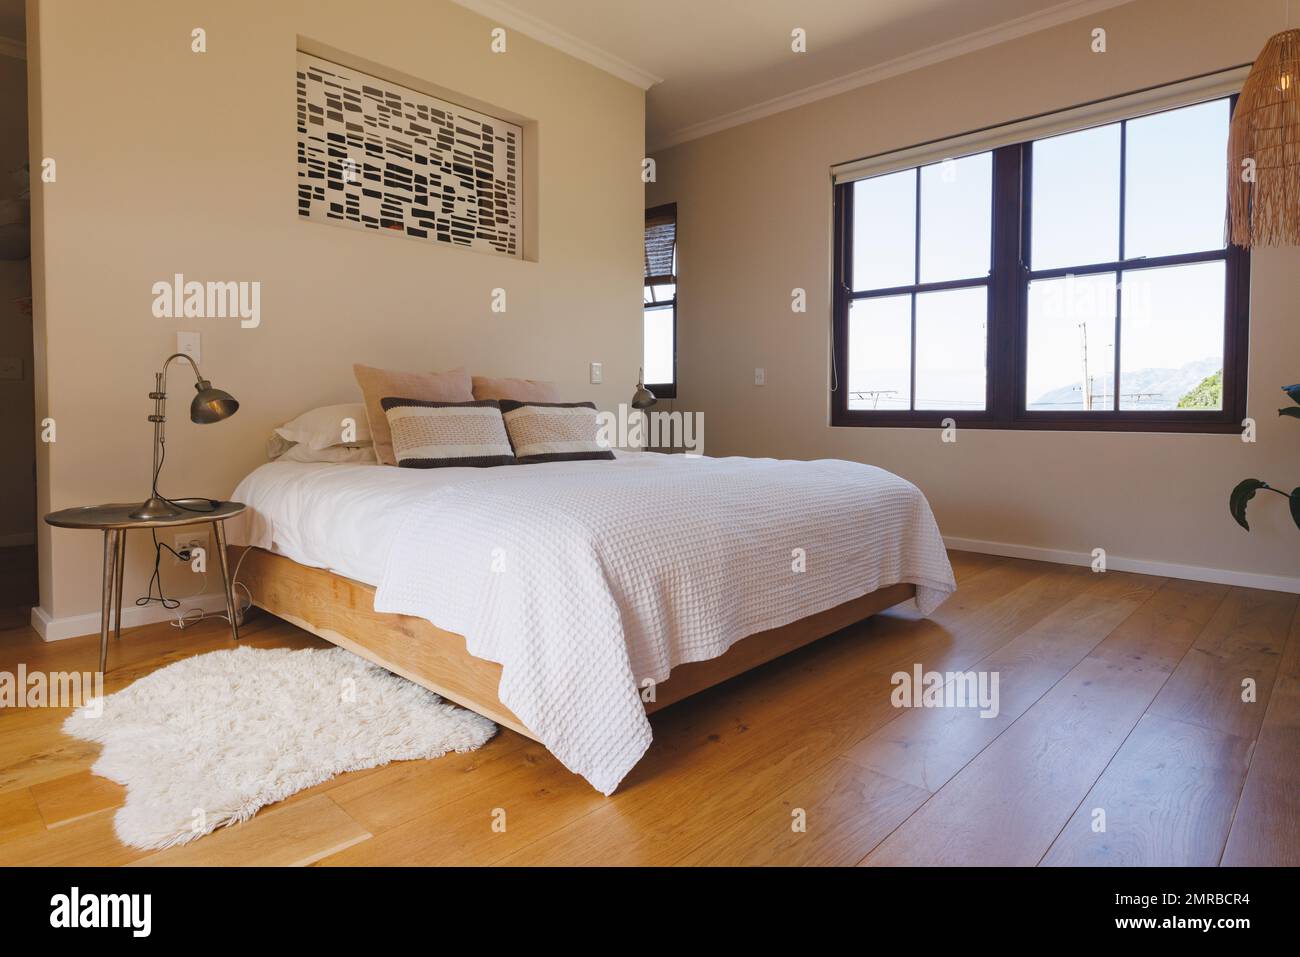 General view of luxury bedroom interior with bed and window Stock Photo